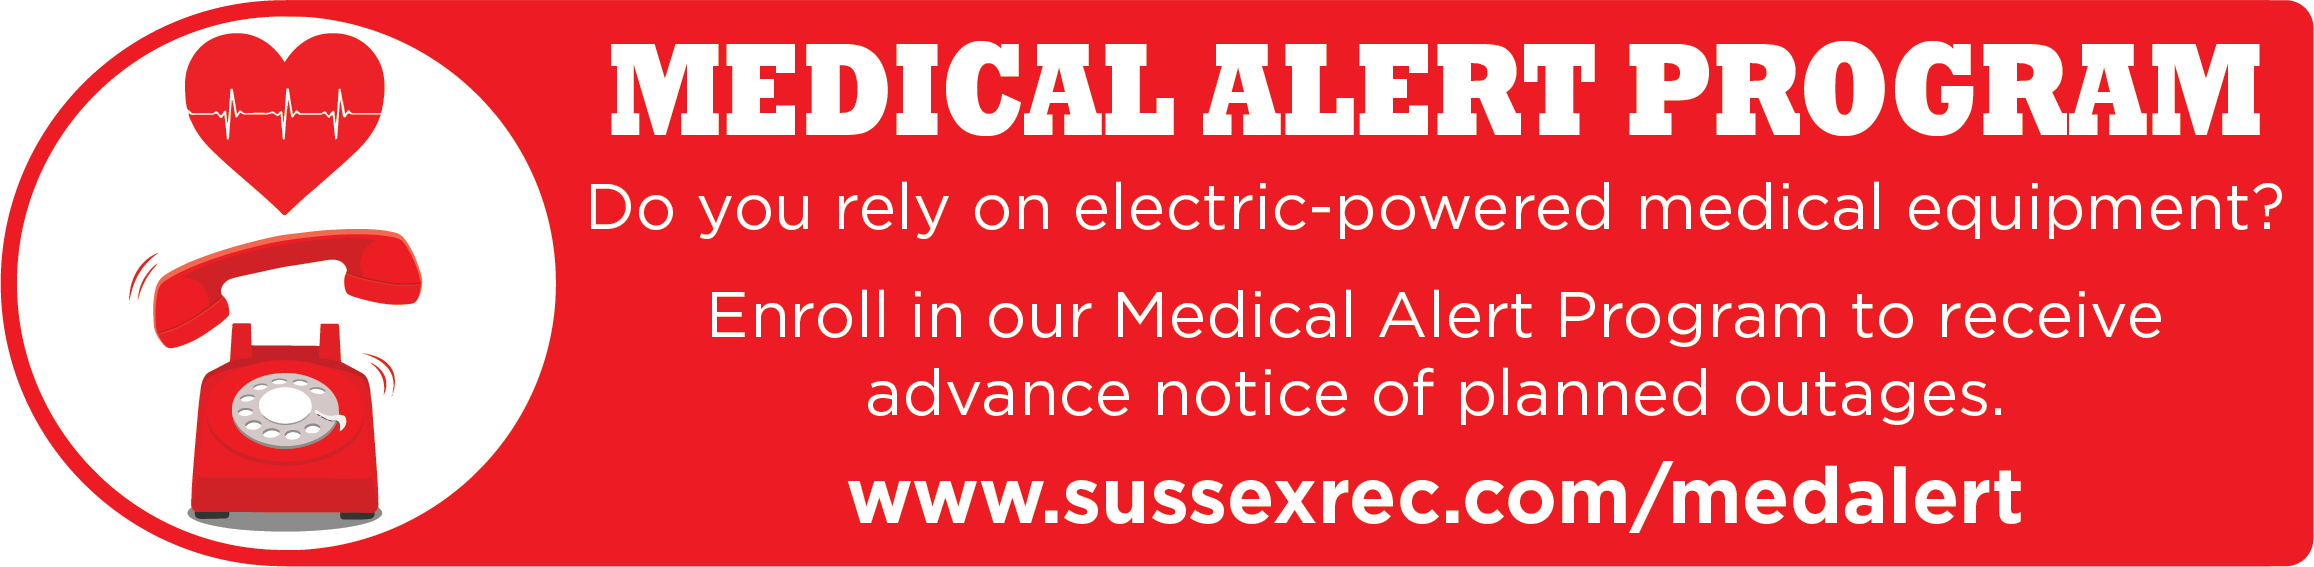 MEDICAL ALERT PROGRAM - Do you rely on electric-powered medical equipment? Enroll in our Medical Alert Program to receive advance notice of planned outages. www.sussexrec.com/medalert